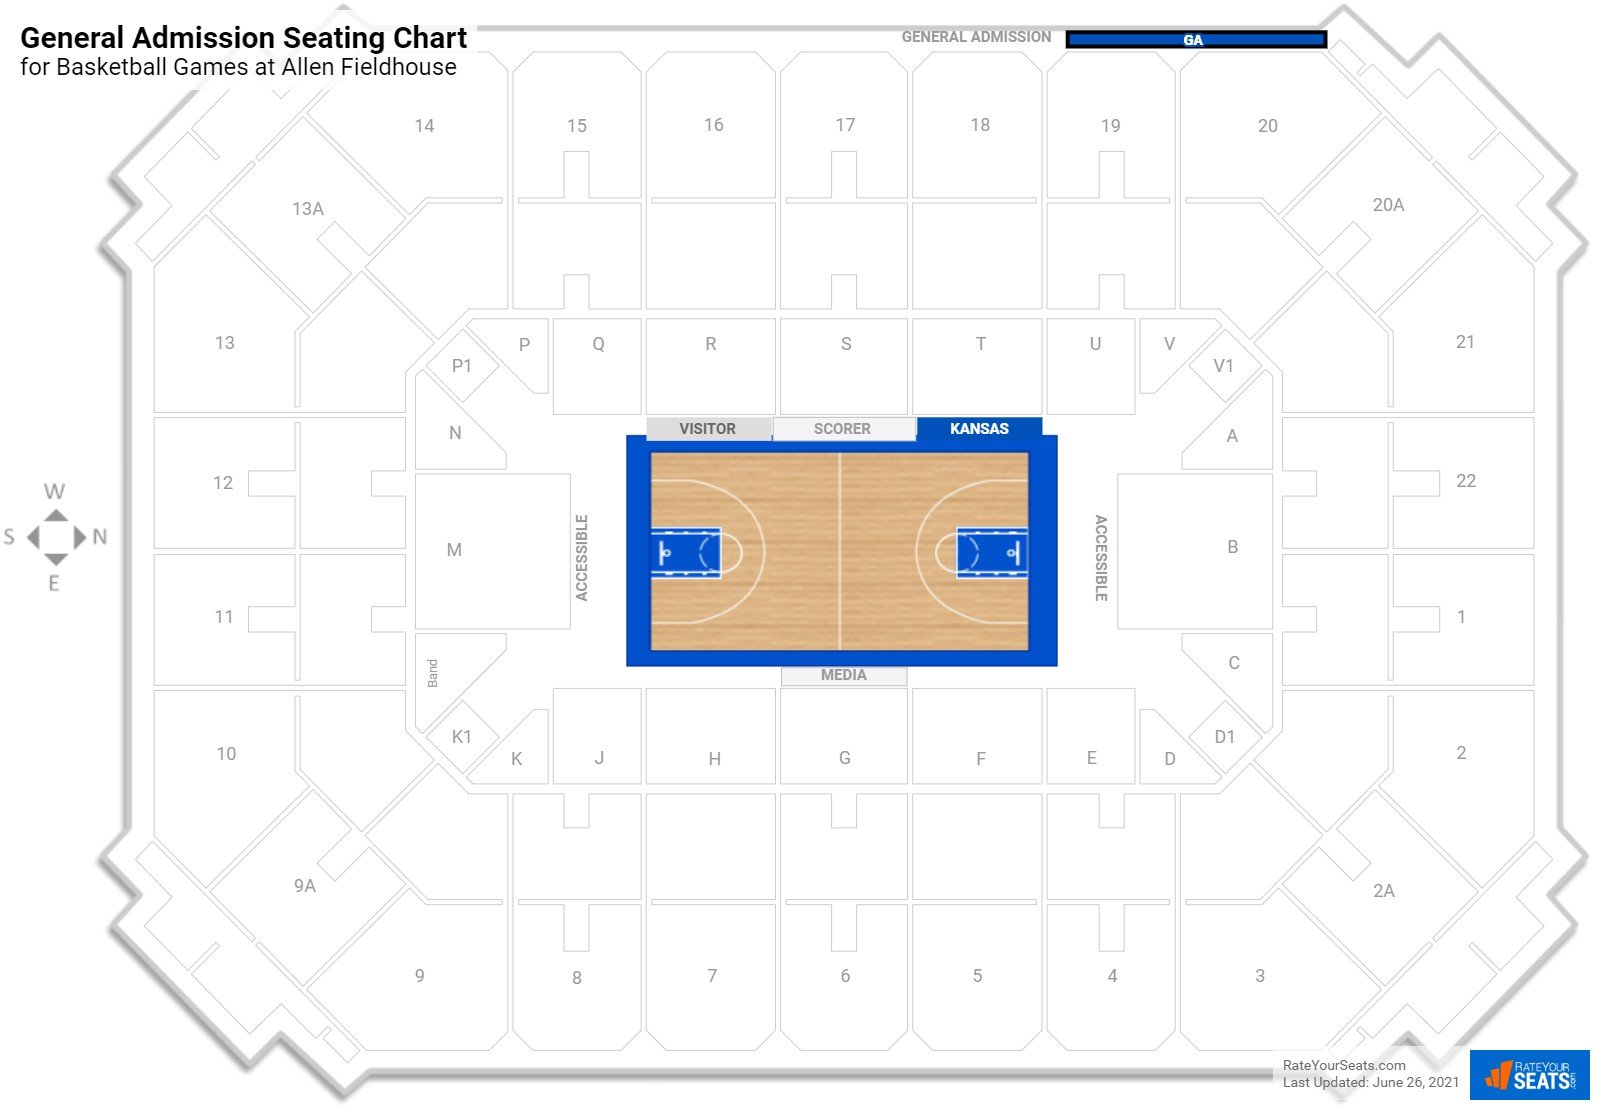 Basketball General Admission Seating Chart at Allen Fieldhouse